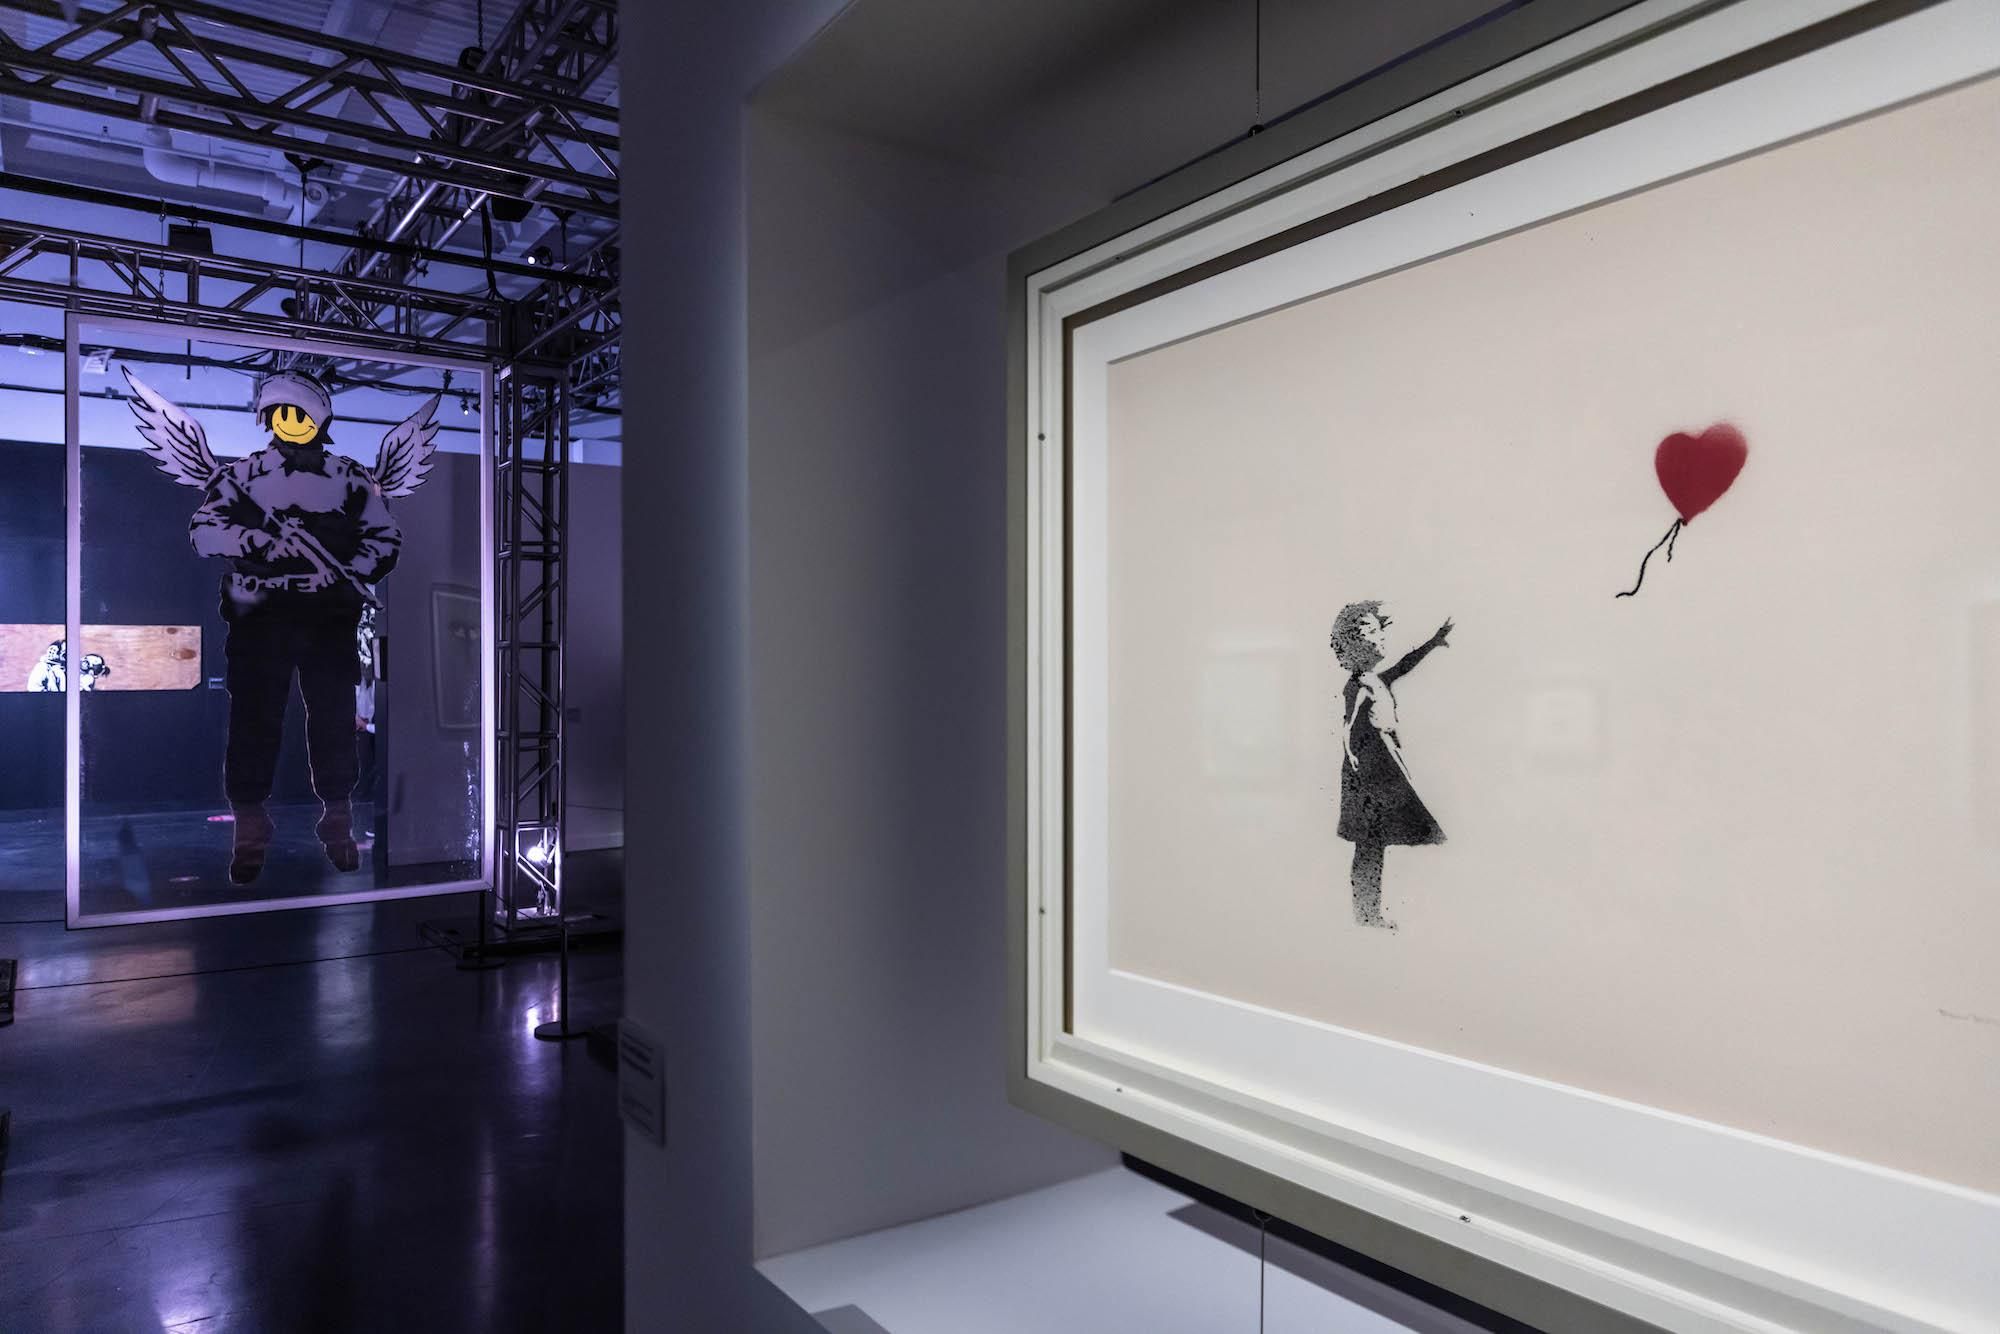 ​'The Art of Banksy' is an unauthorized glimpse of the elusive talent at SF's Palace of Fine Arts